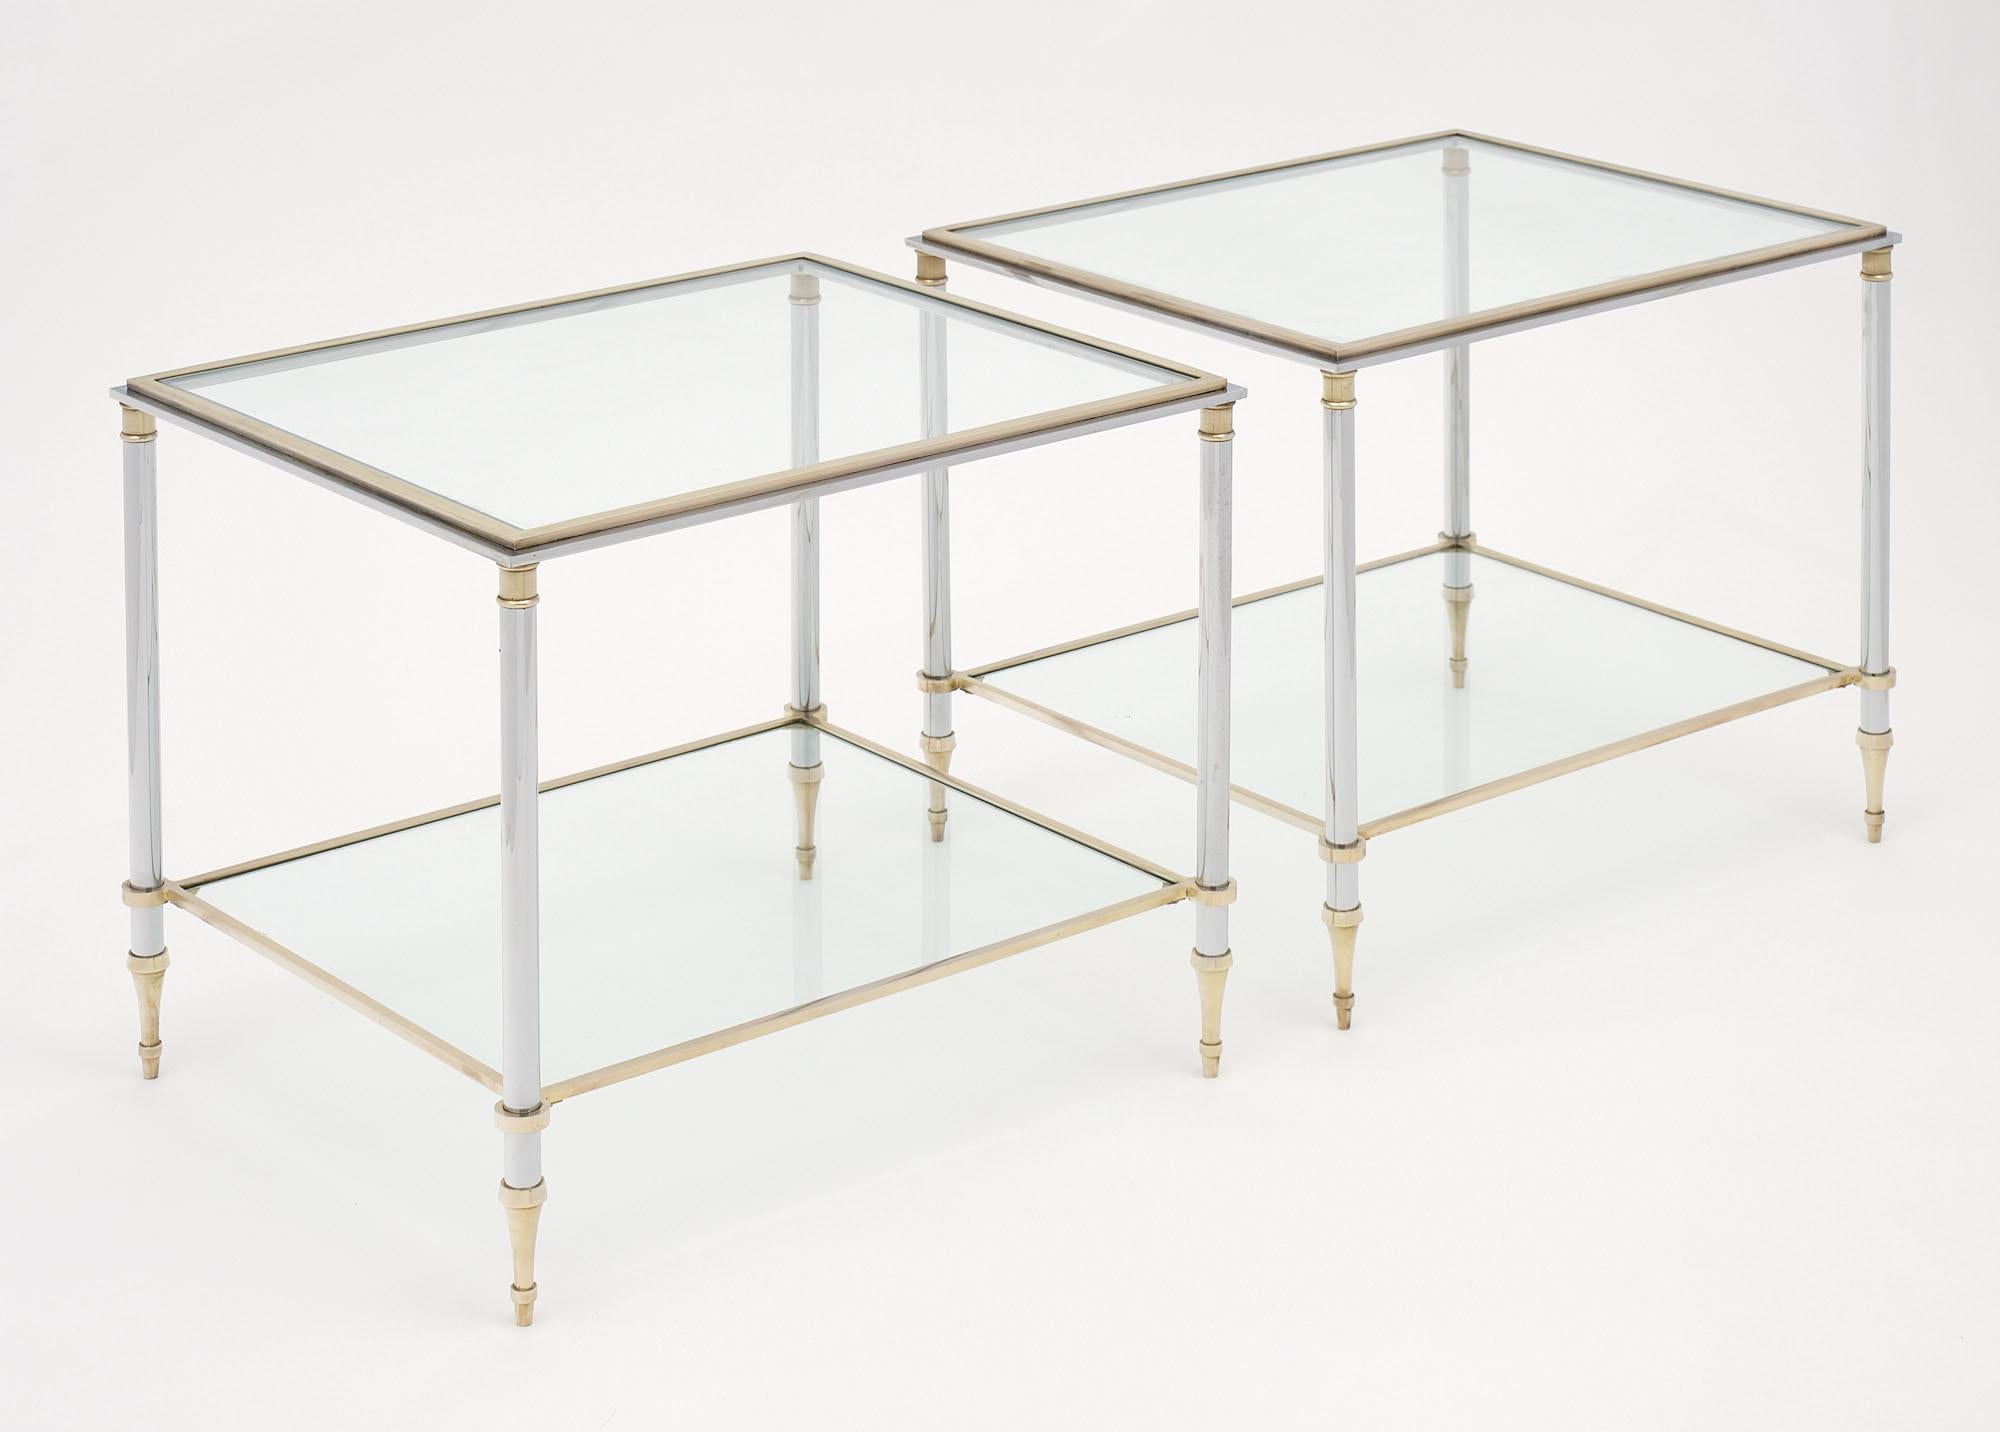 Pair of side tables from France made of steel and brass, featuring two clear glass shelves each. This pair has strong design and craftsmanship.